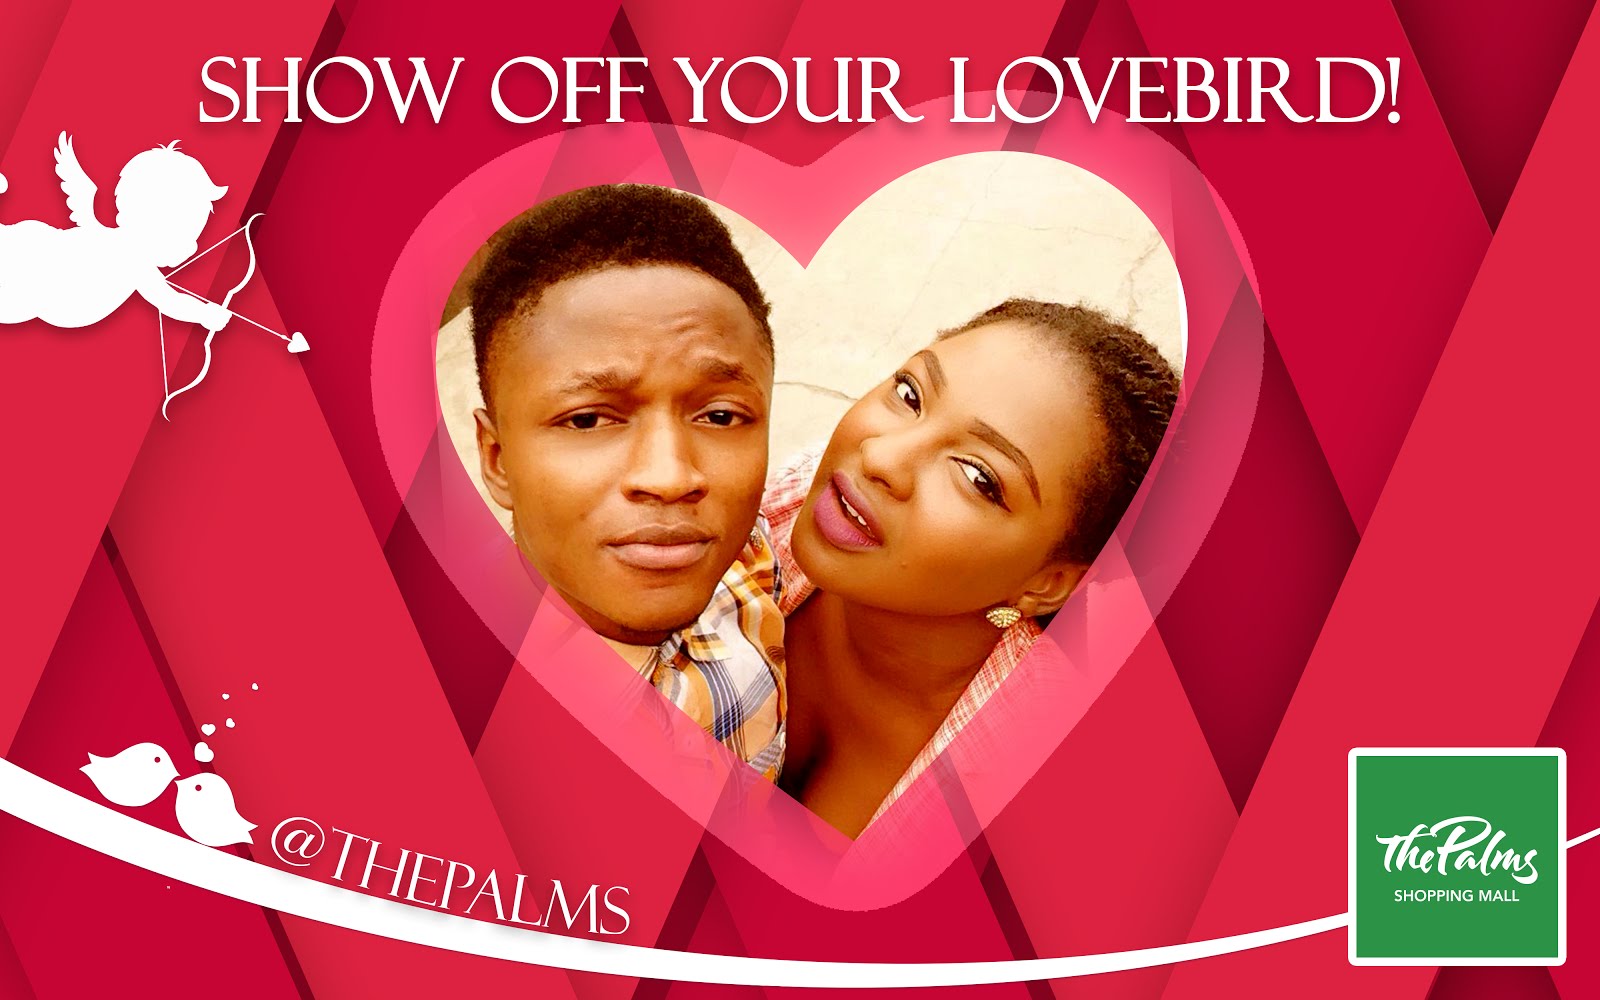 Show off your lovebird @ThepalmsNG